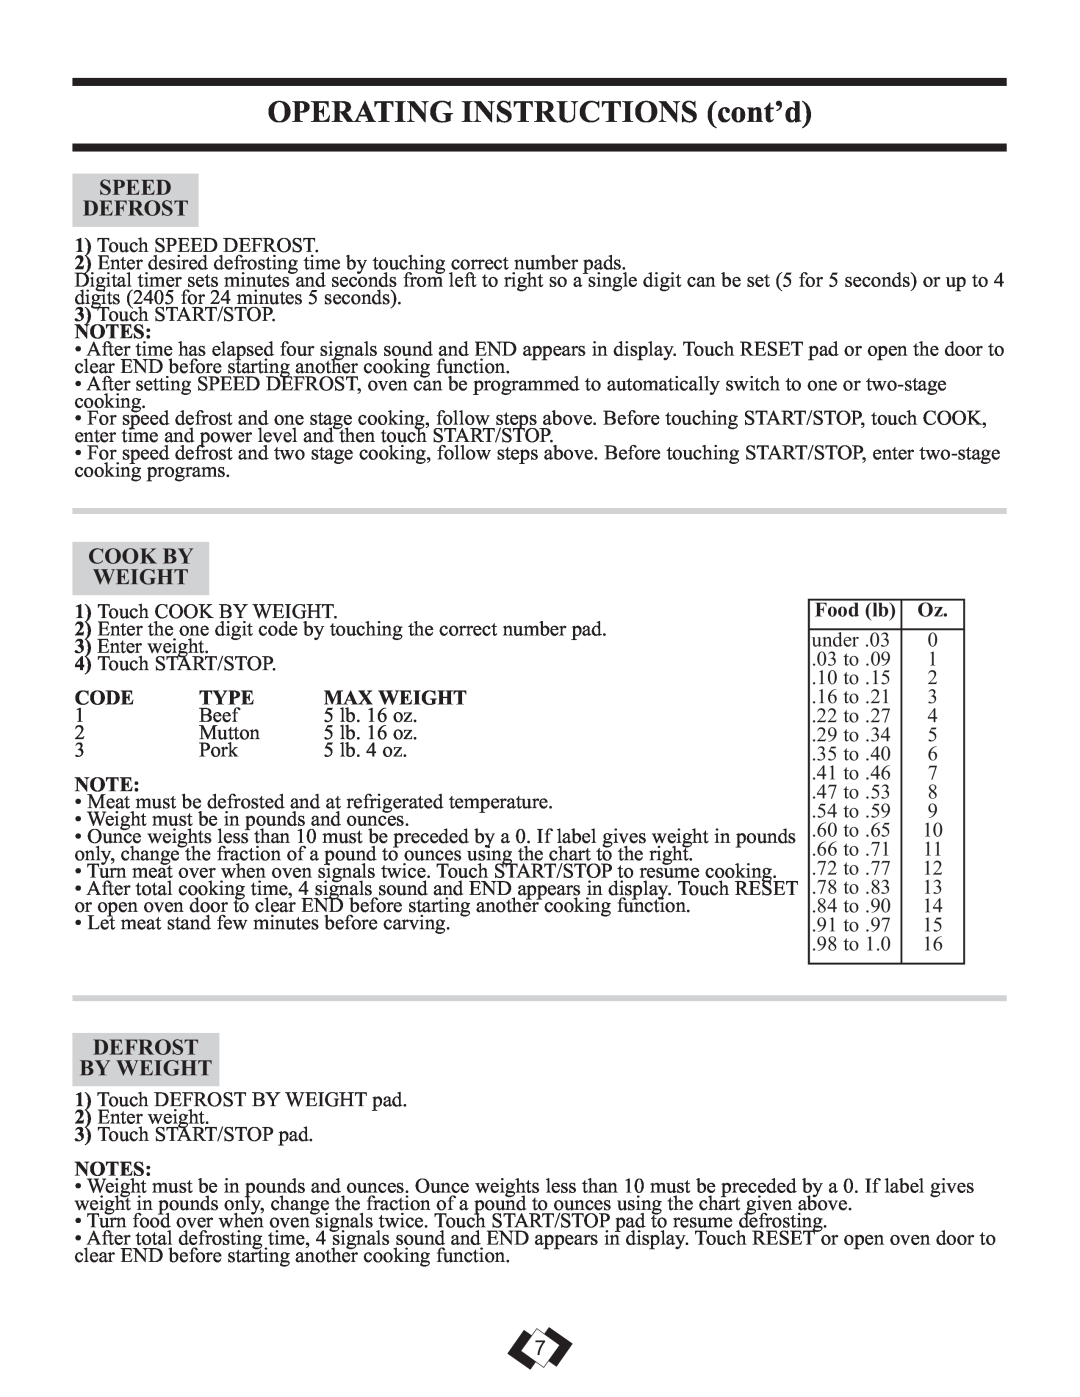 Sunbeam SBMW609W OPERATING INSTRUCTIONS cont’d, Speed Defrost, Cook By Weight, Defrost By Weight, Code, Type, Max Weight 